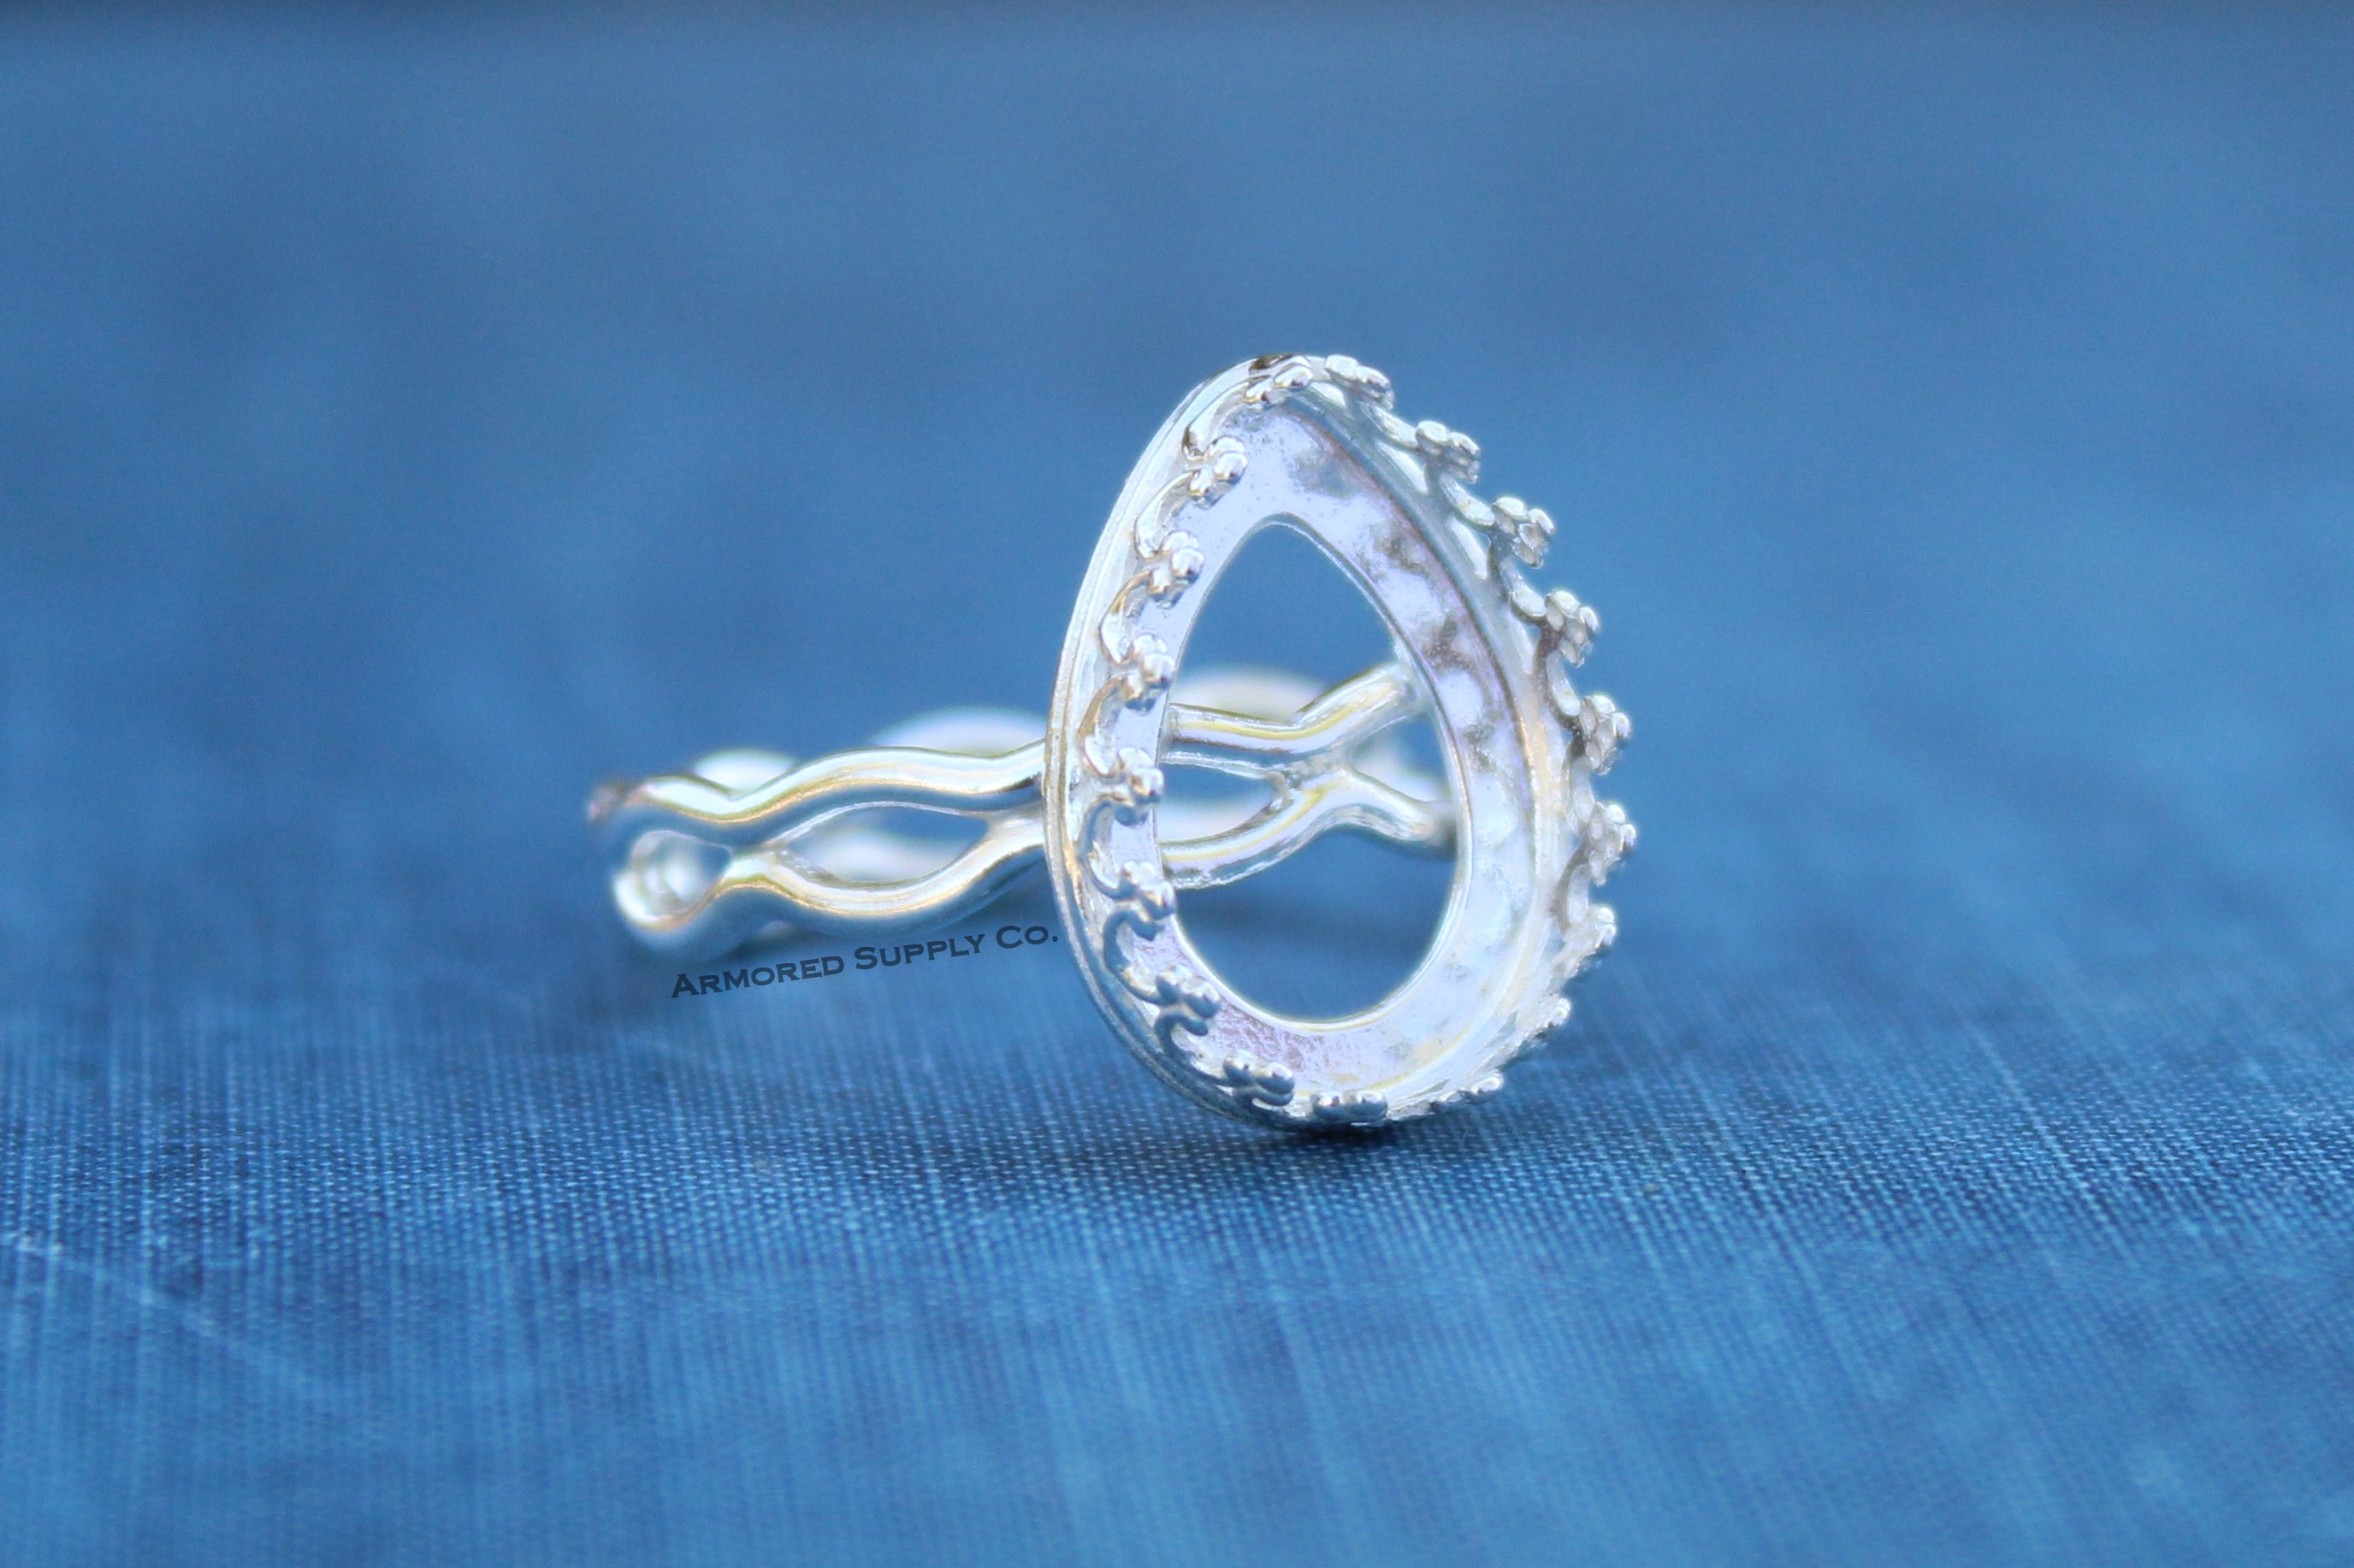 Ripple Ring Crown Pear Bezel Cup Ring blank Setting